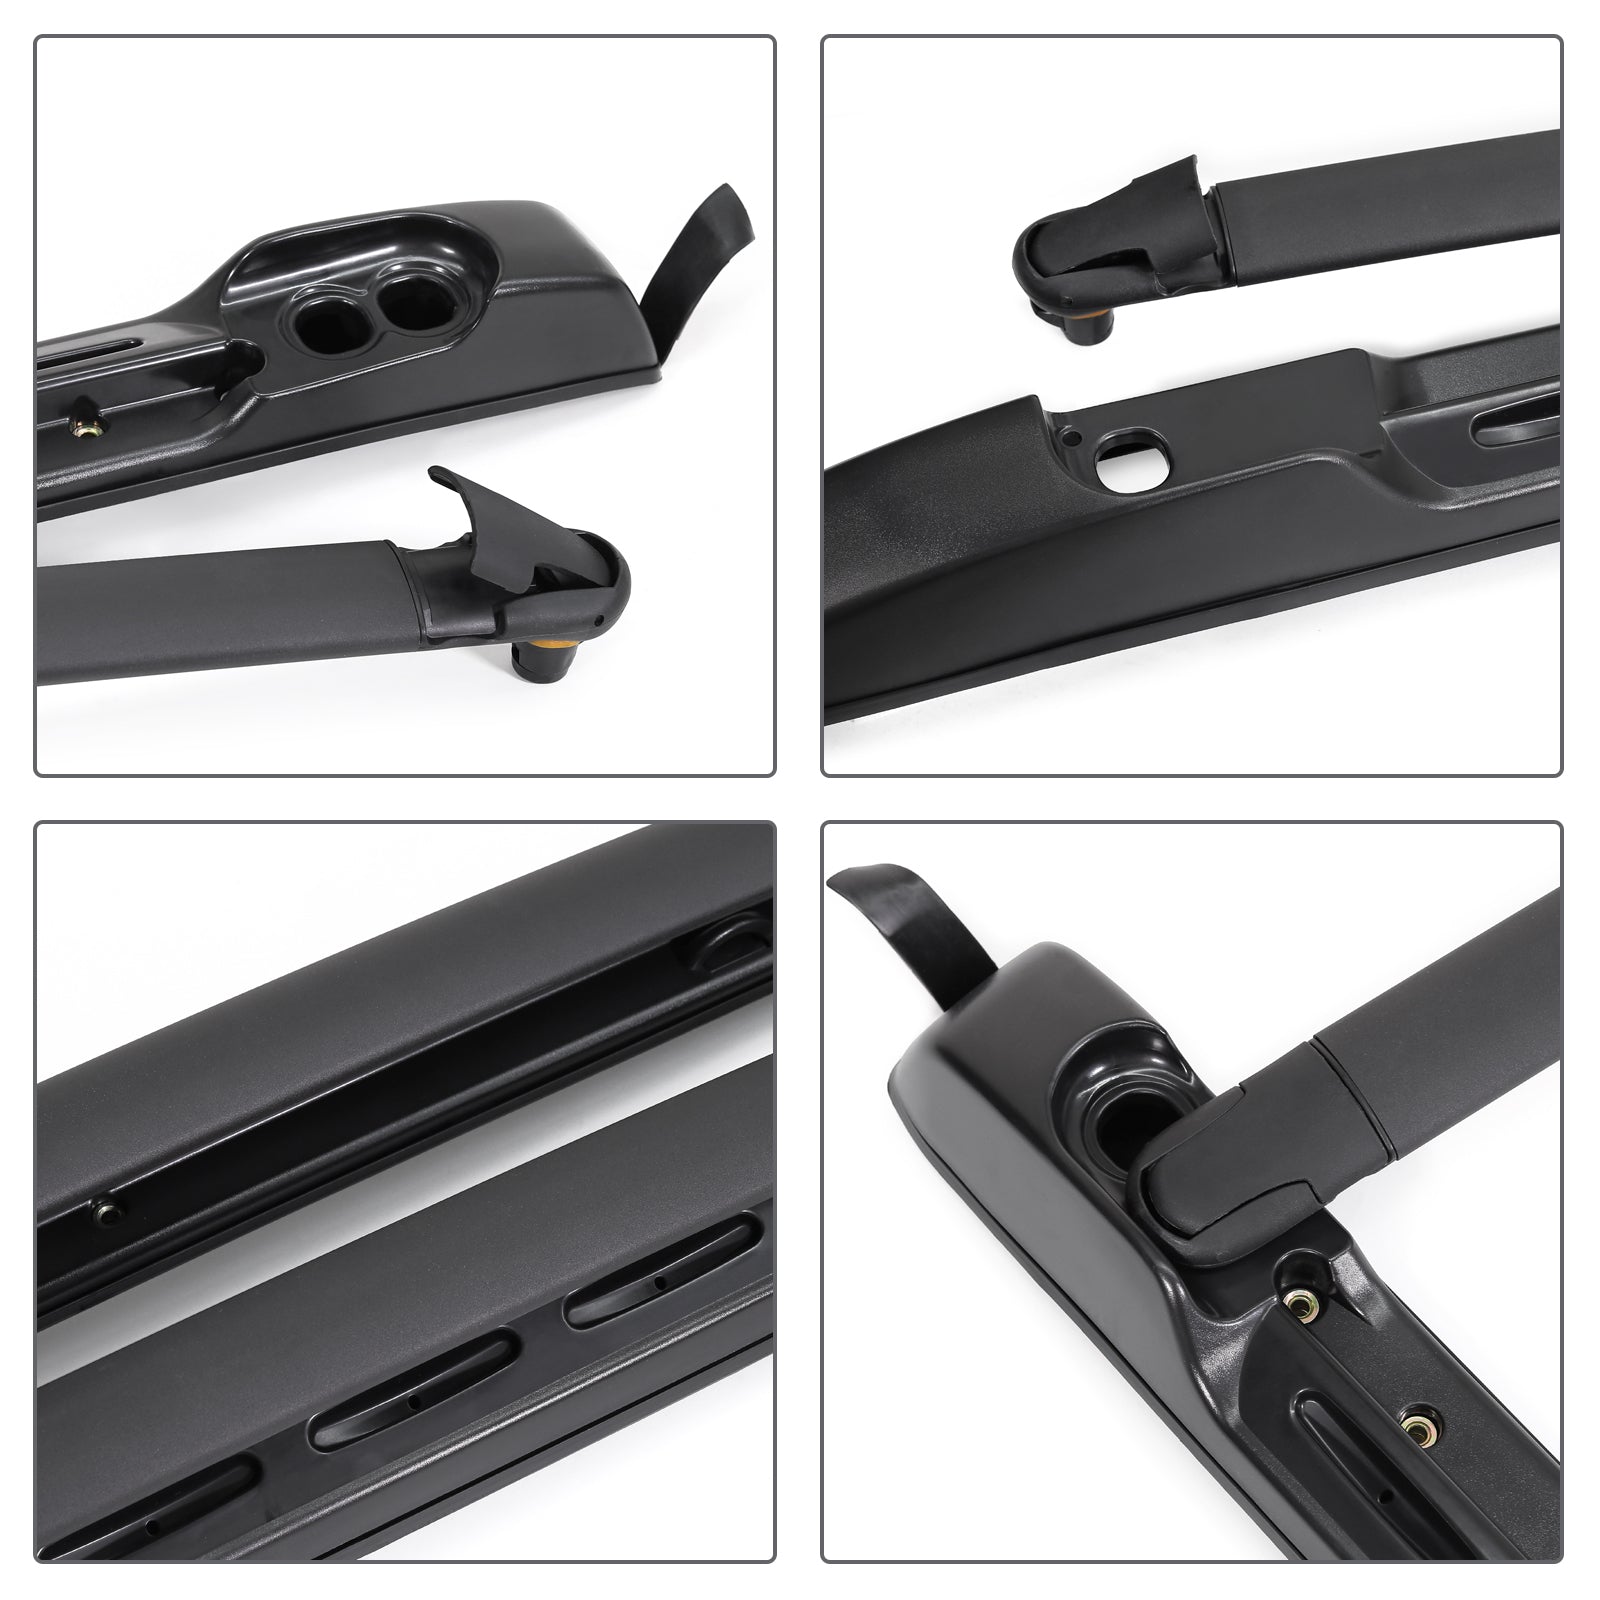 Roof Rack For 2005 2022 Tacoma Double Cab - Black